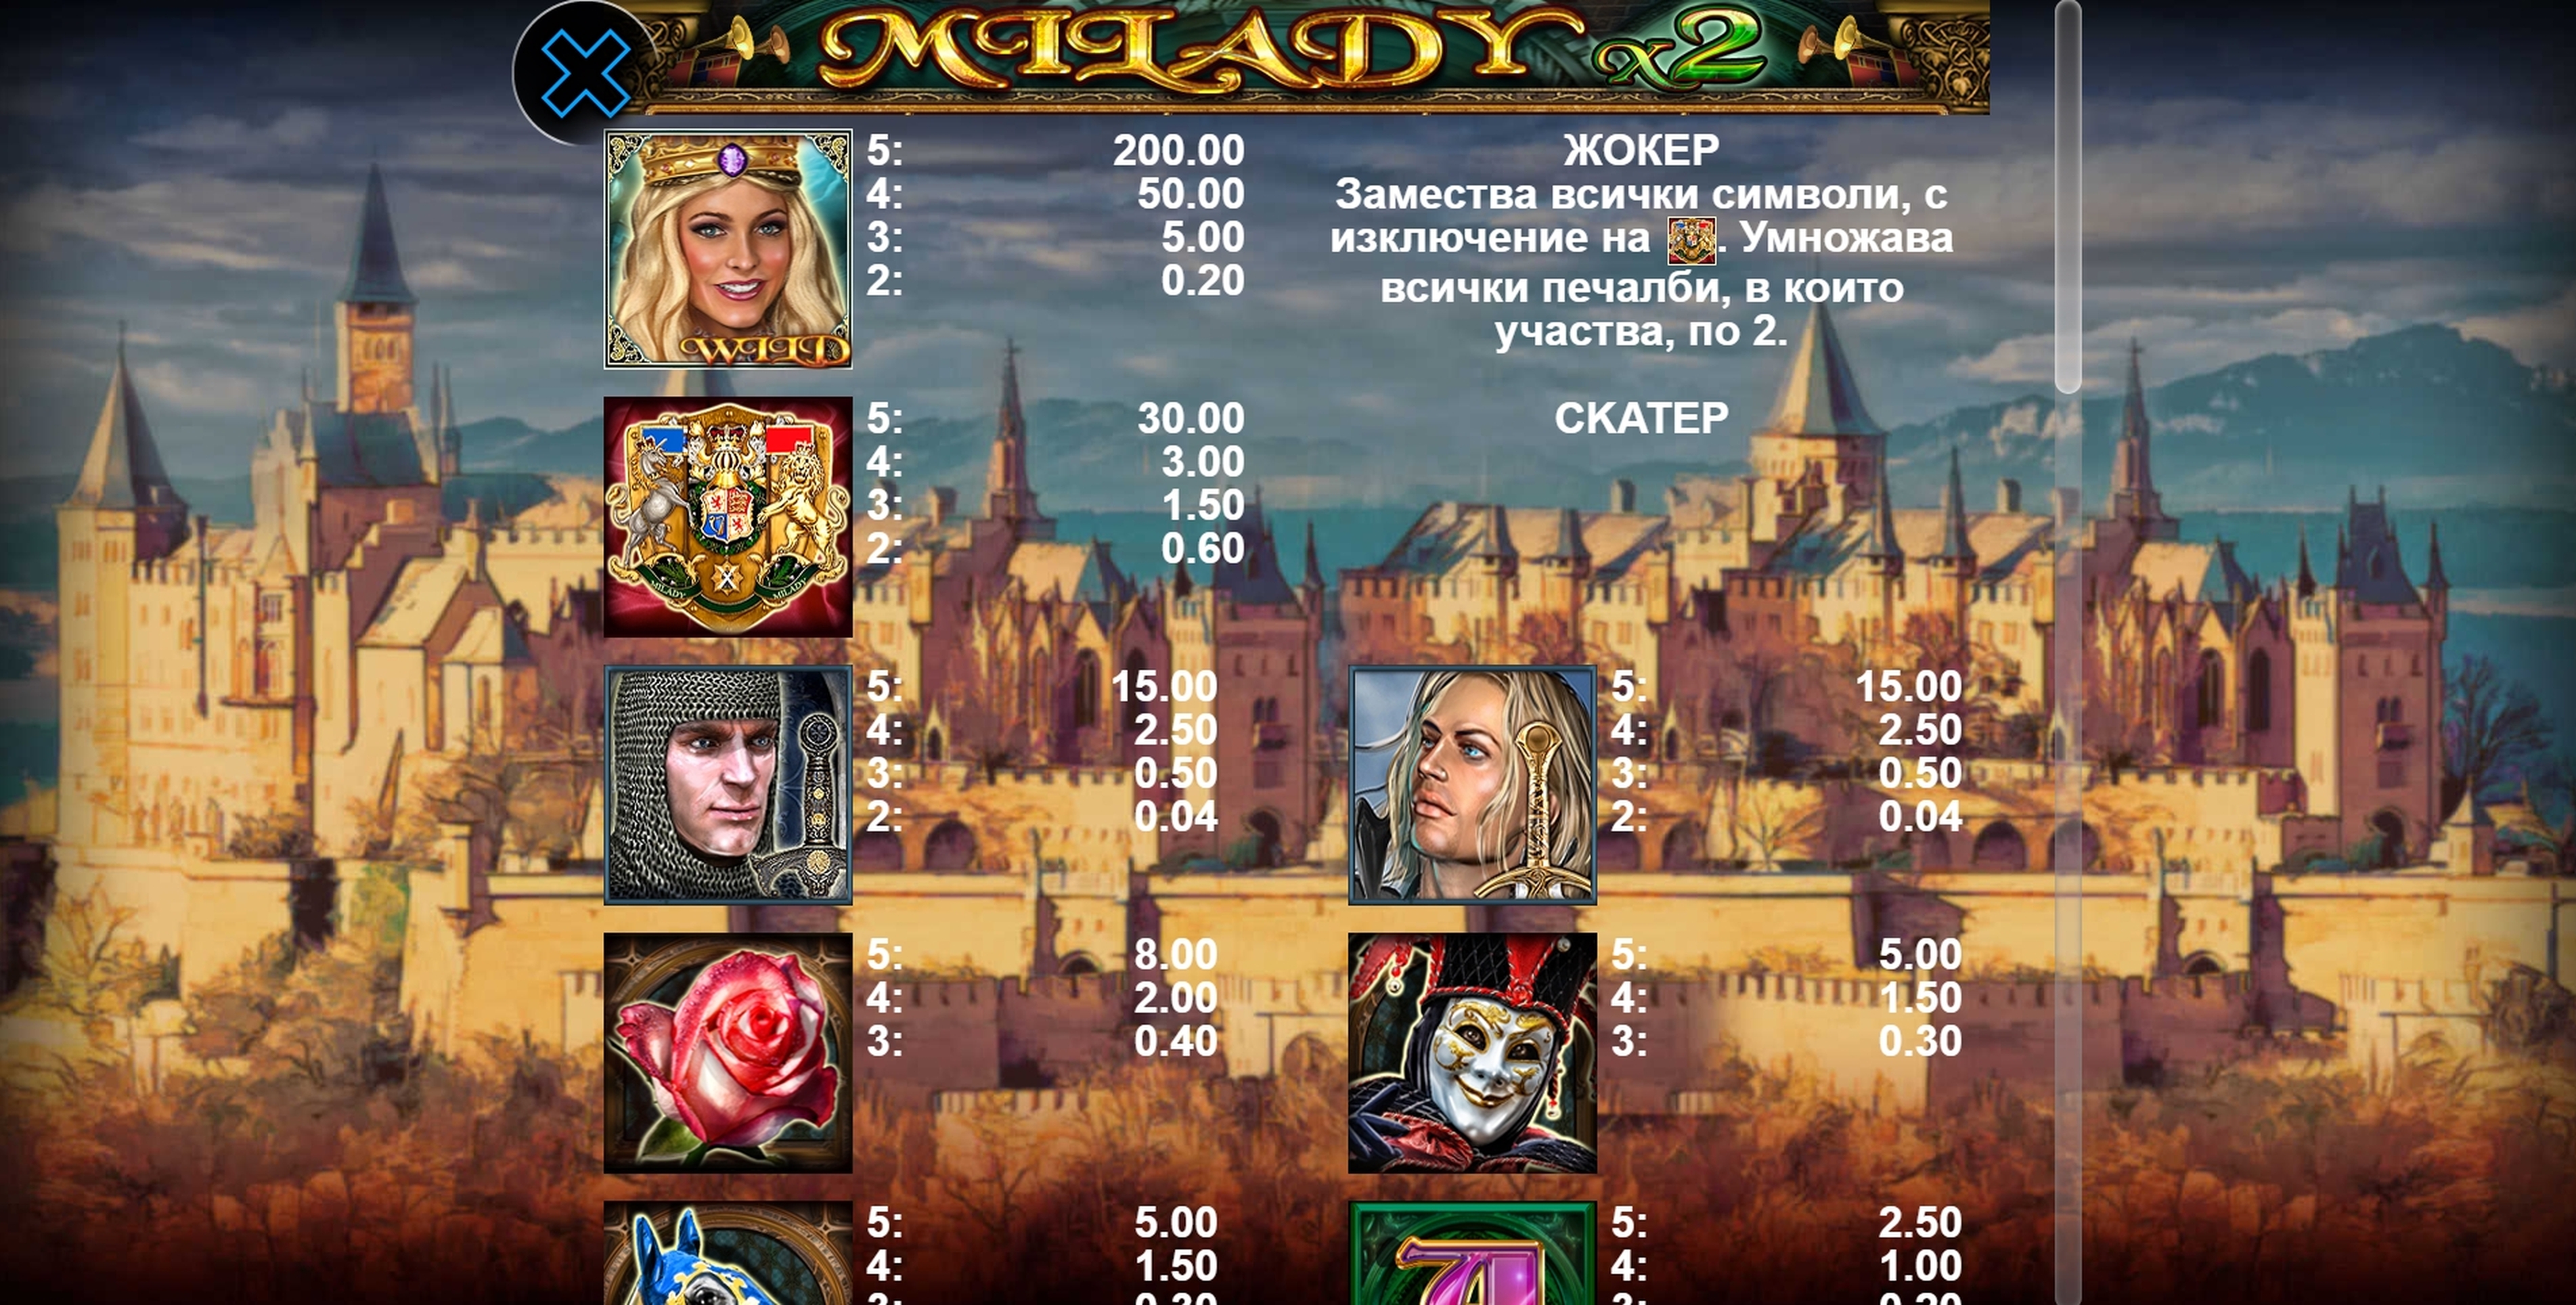 Info of Milady X2 Slot Game by casino technology